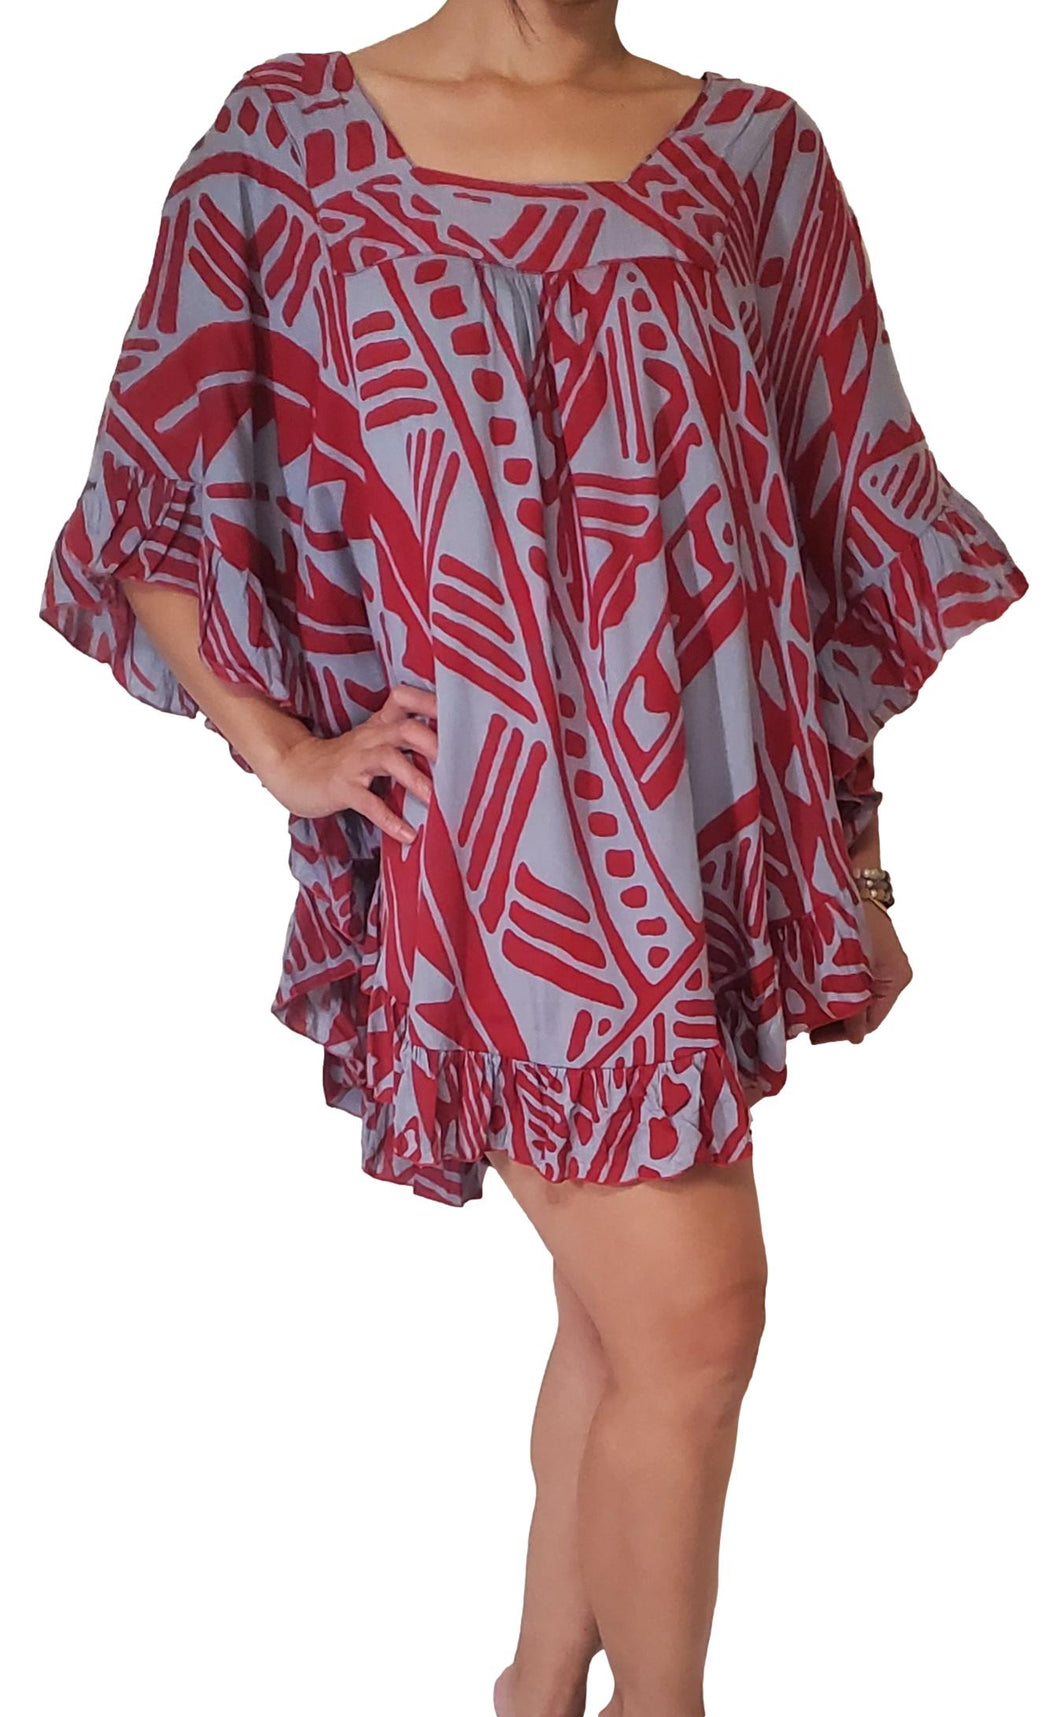 Ruffle Cover-up - Tribal - Flame Scarlet & Faded Denim